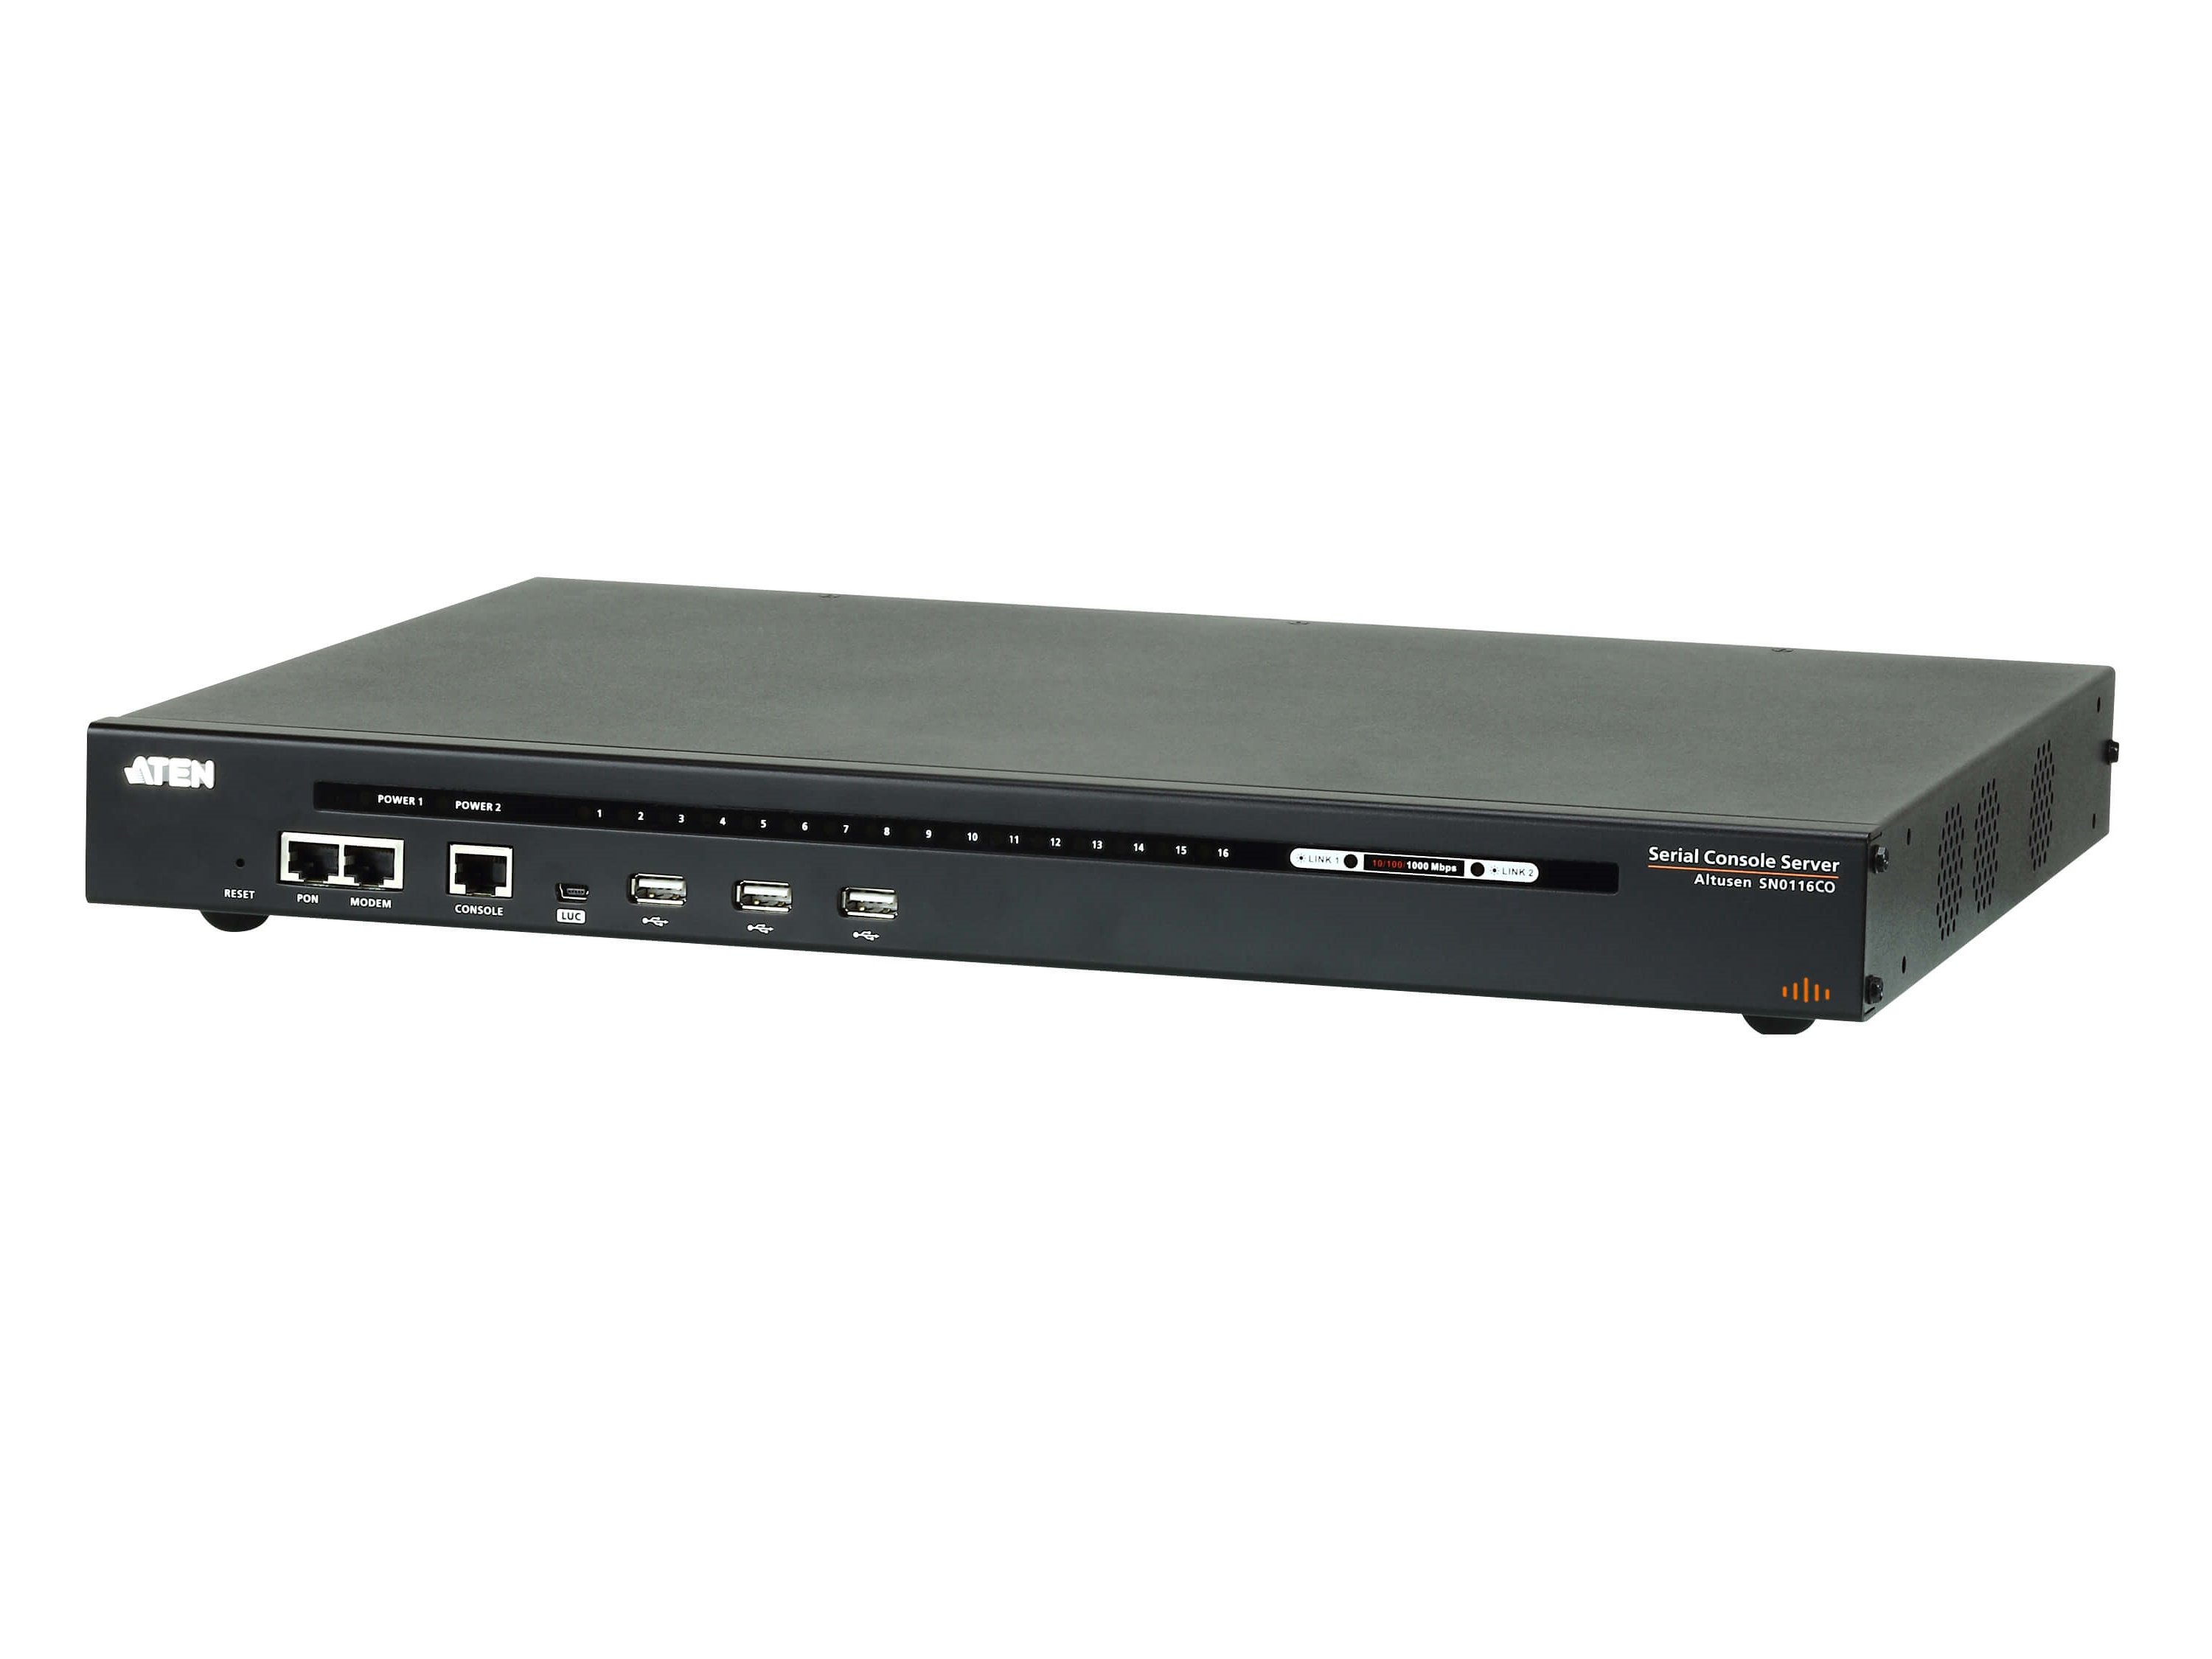 Aten SN0116COD 16-Port Serial Console Server with Dual Power/LAN/DC Power